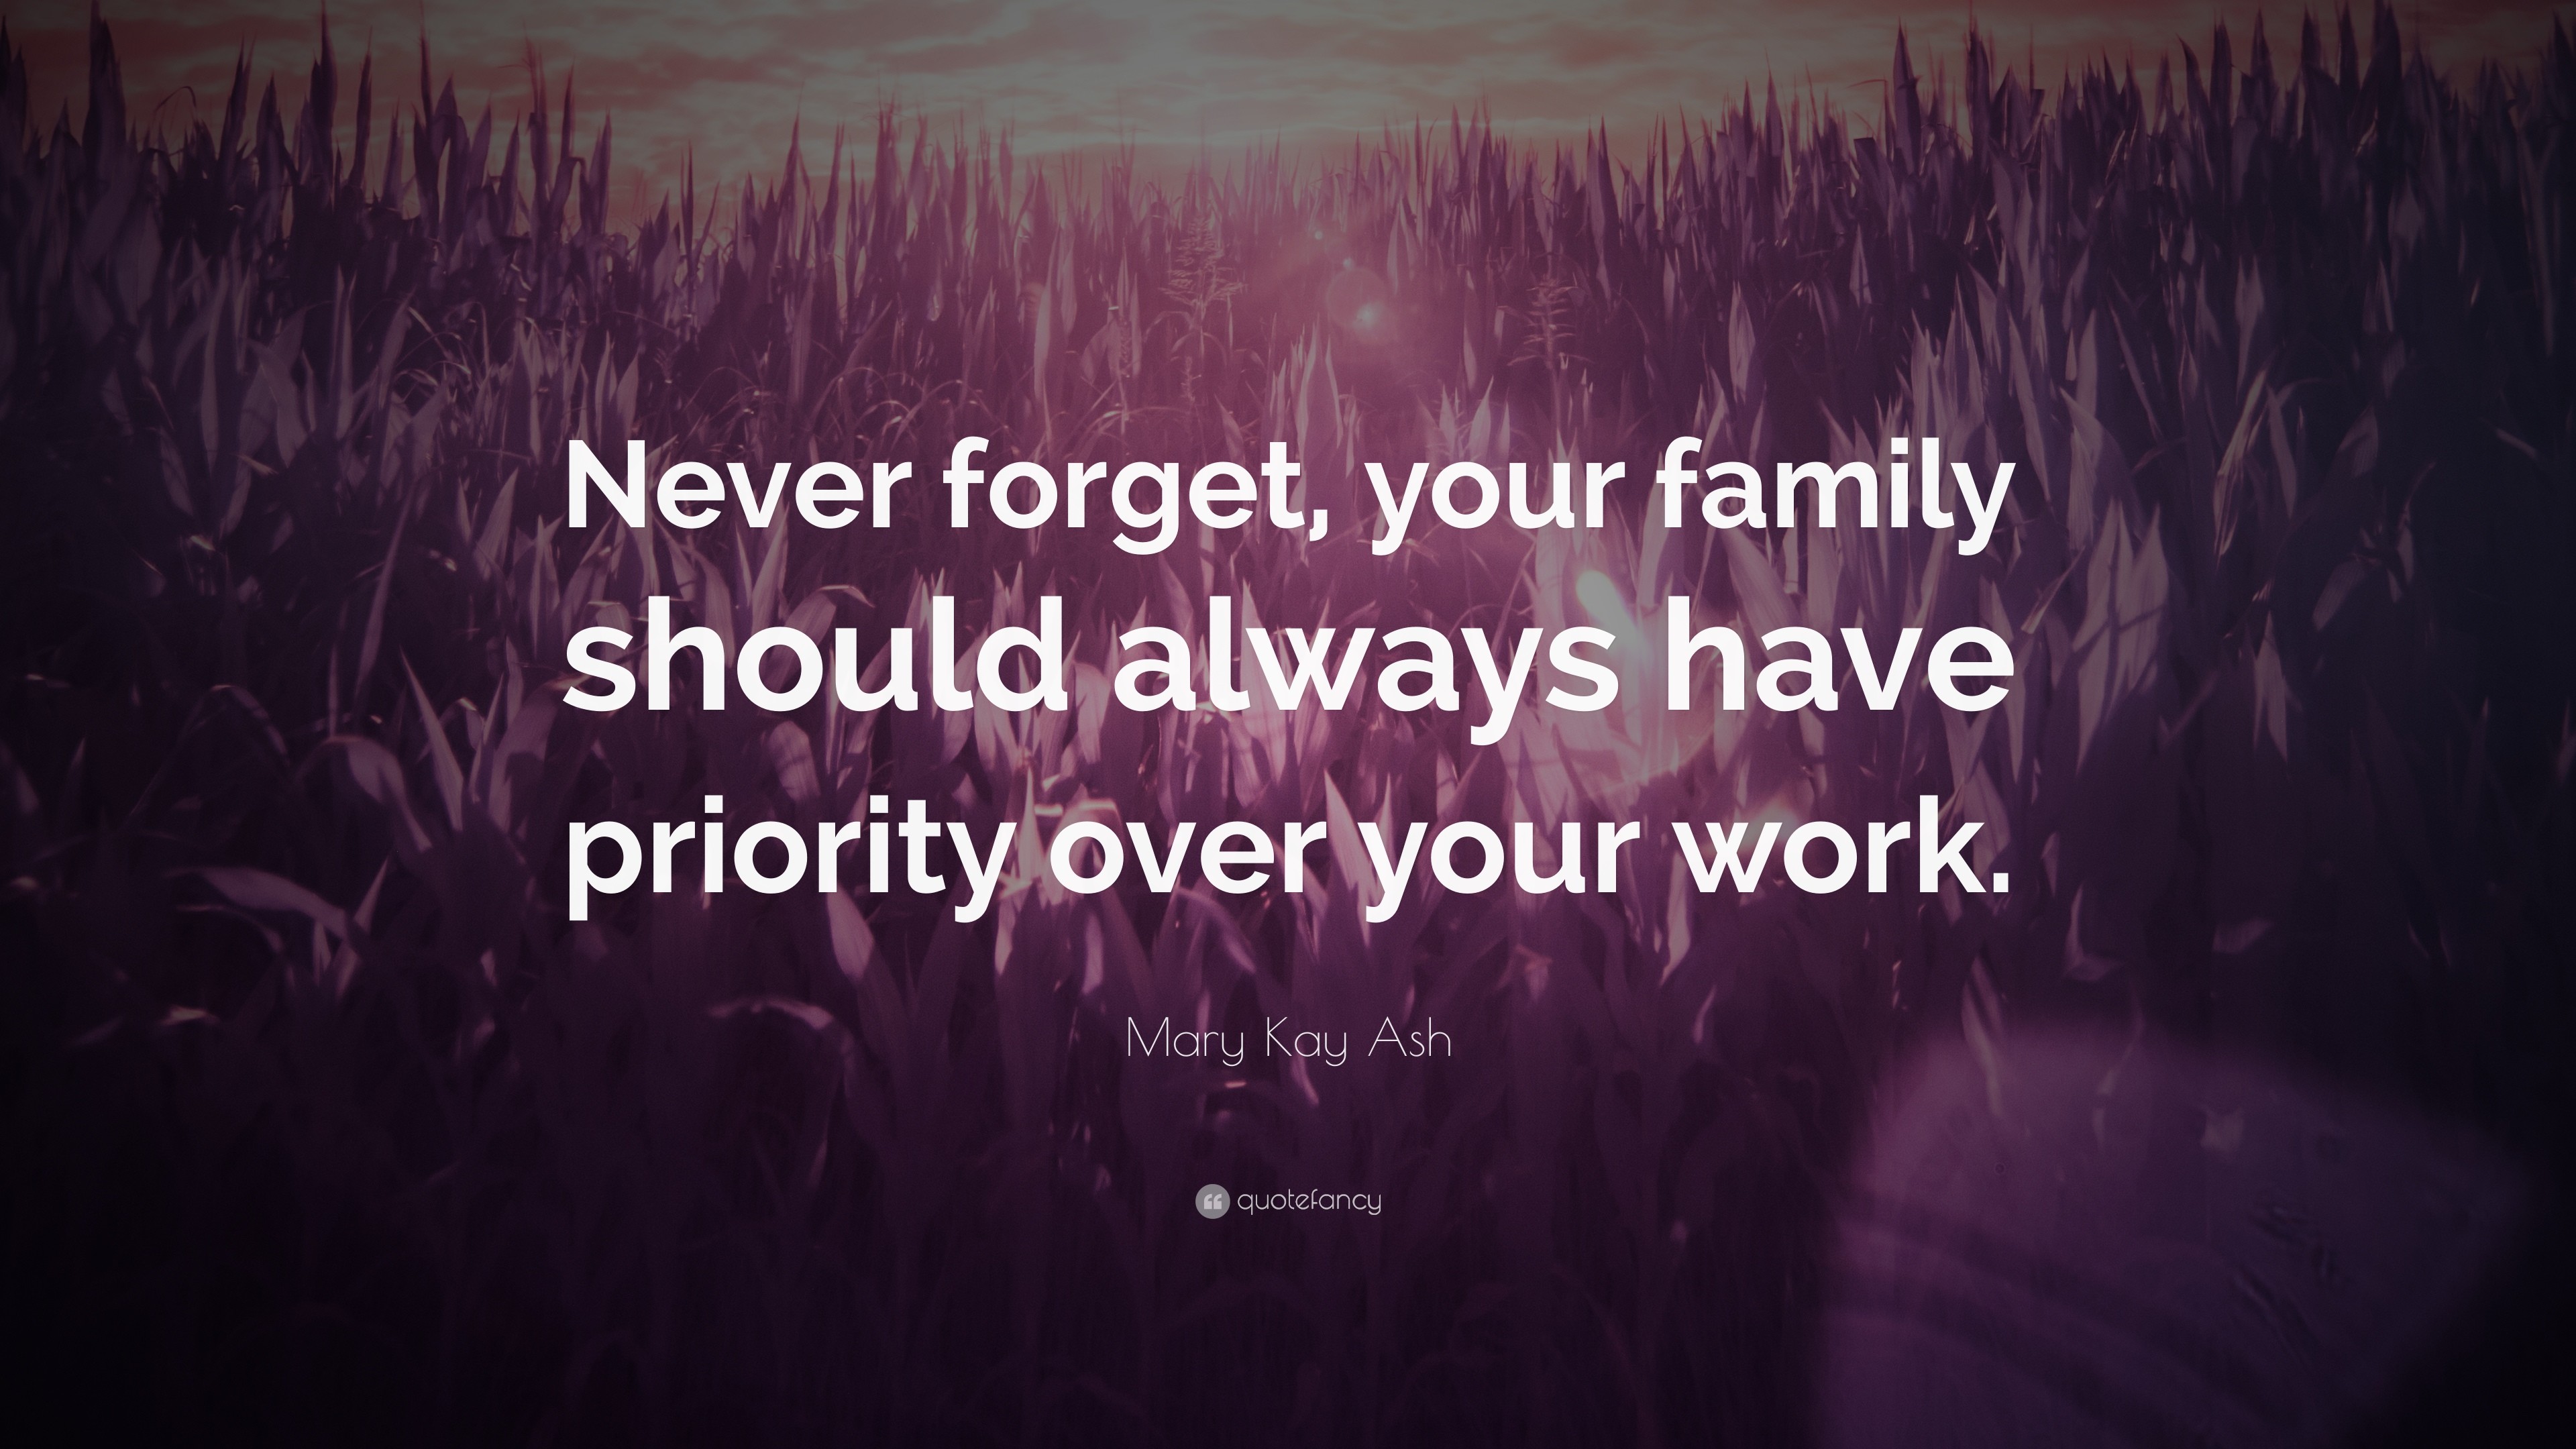 3840x2160 Mary Kay Ash Quote: “Never forget, your family should always have priority  over